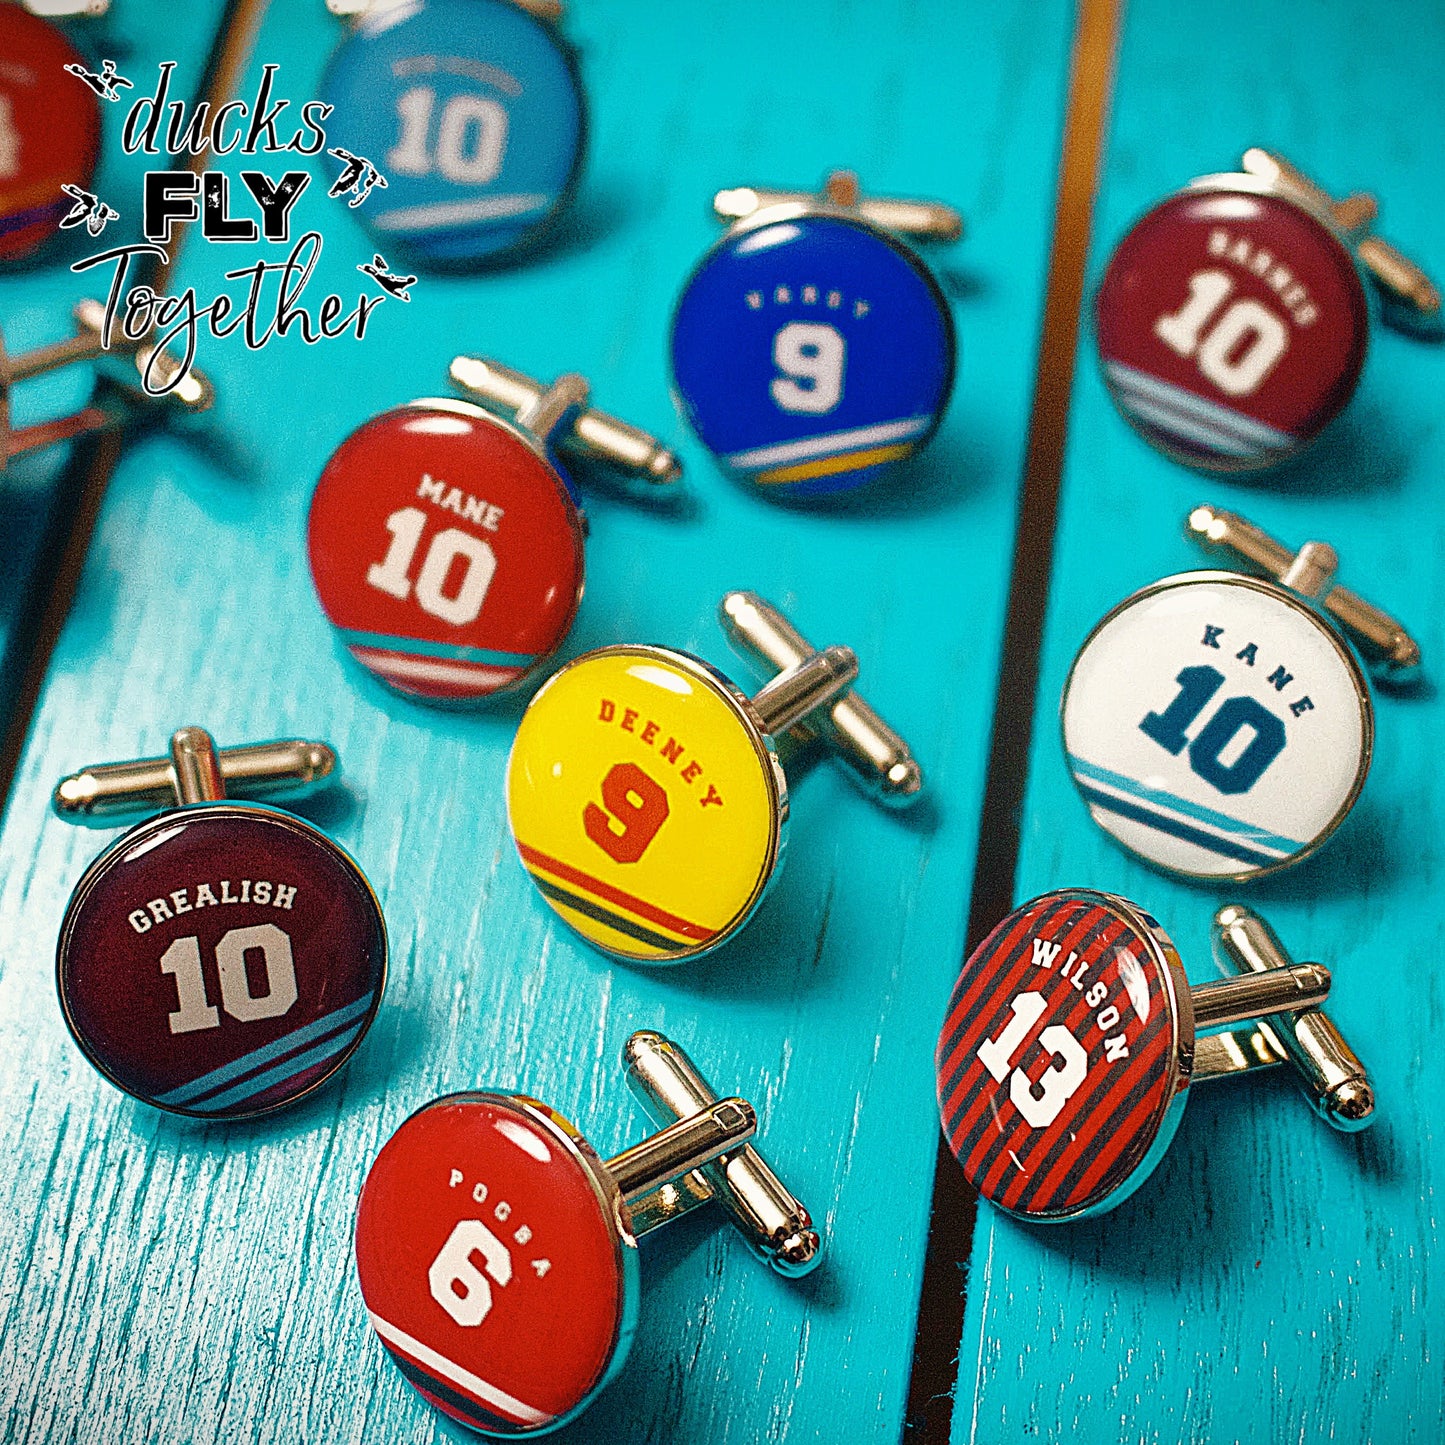 Saracens Rugby Cufflinks. Personalised gift for rugby fan. Christmas present for men. Premiership Rugby. Sports jersey. Tie Bar Pocket Watch